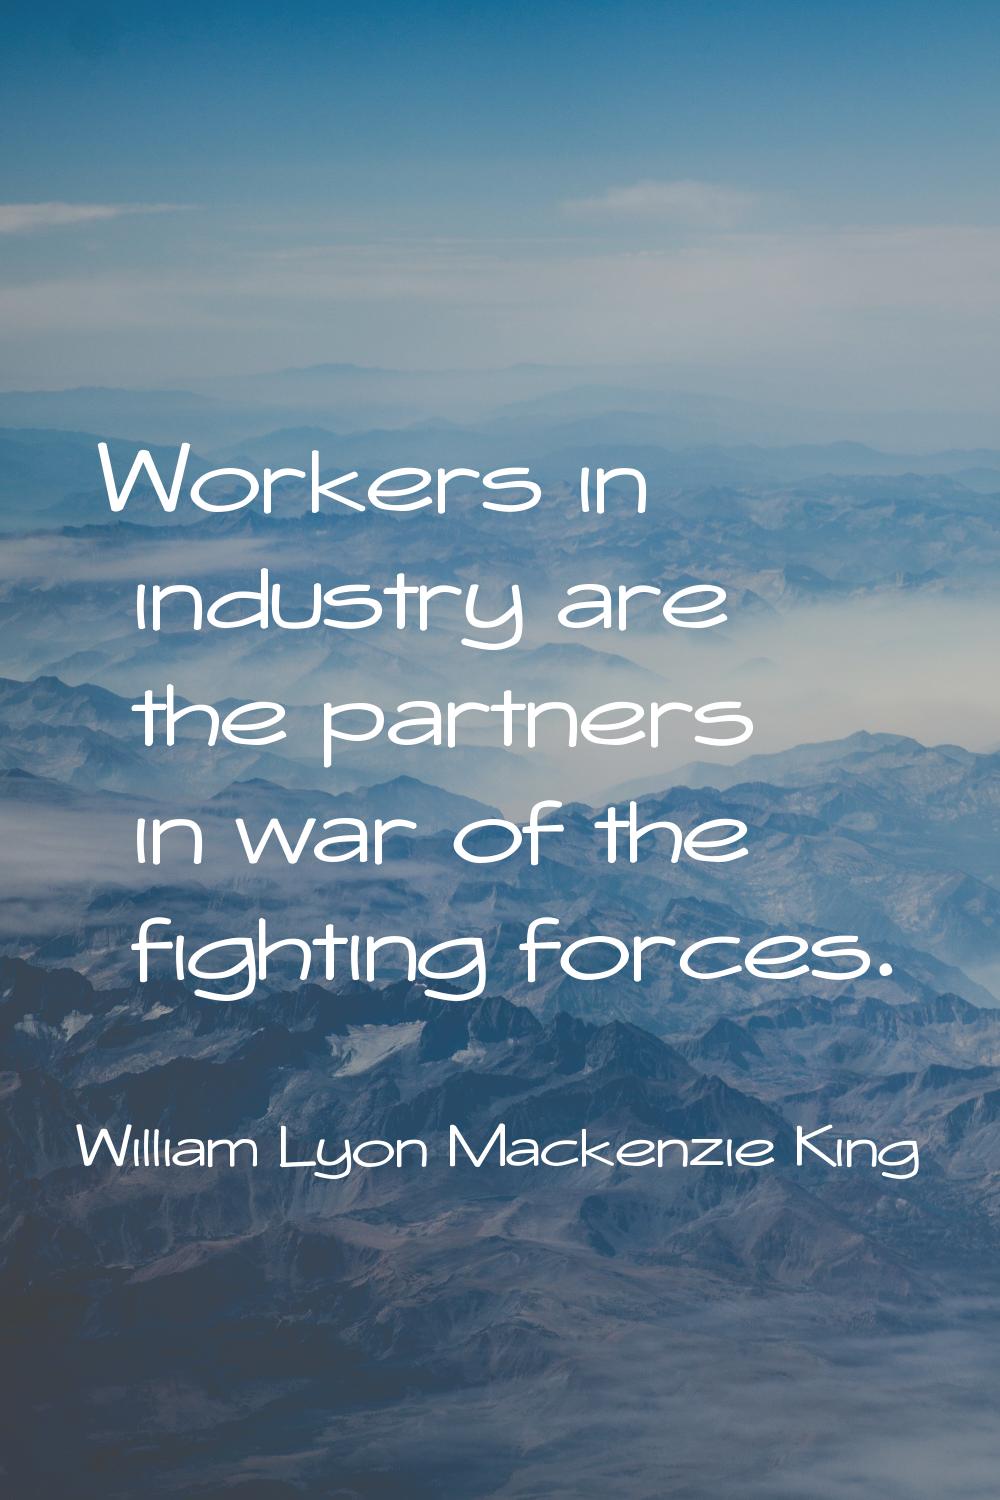 Workers in industry are the partners in war of the fighting forces.